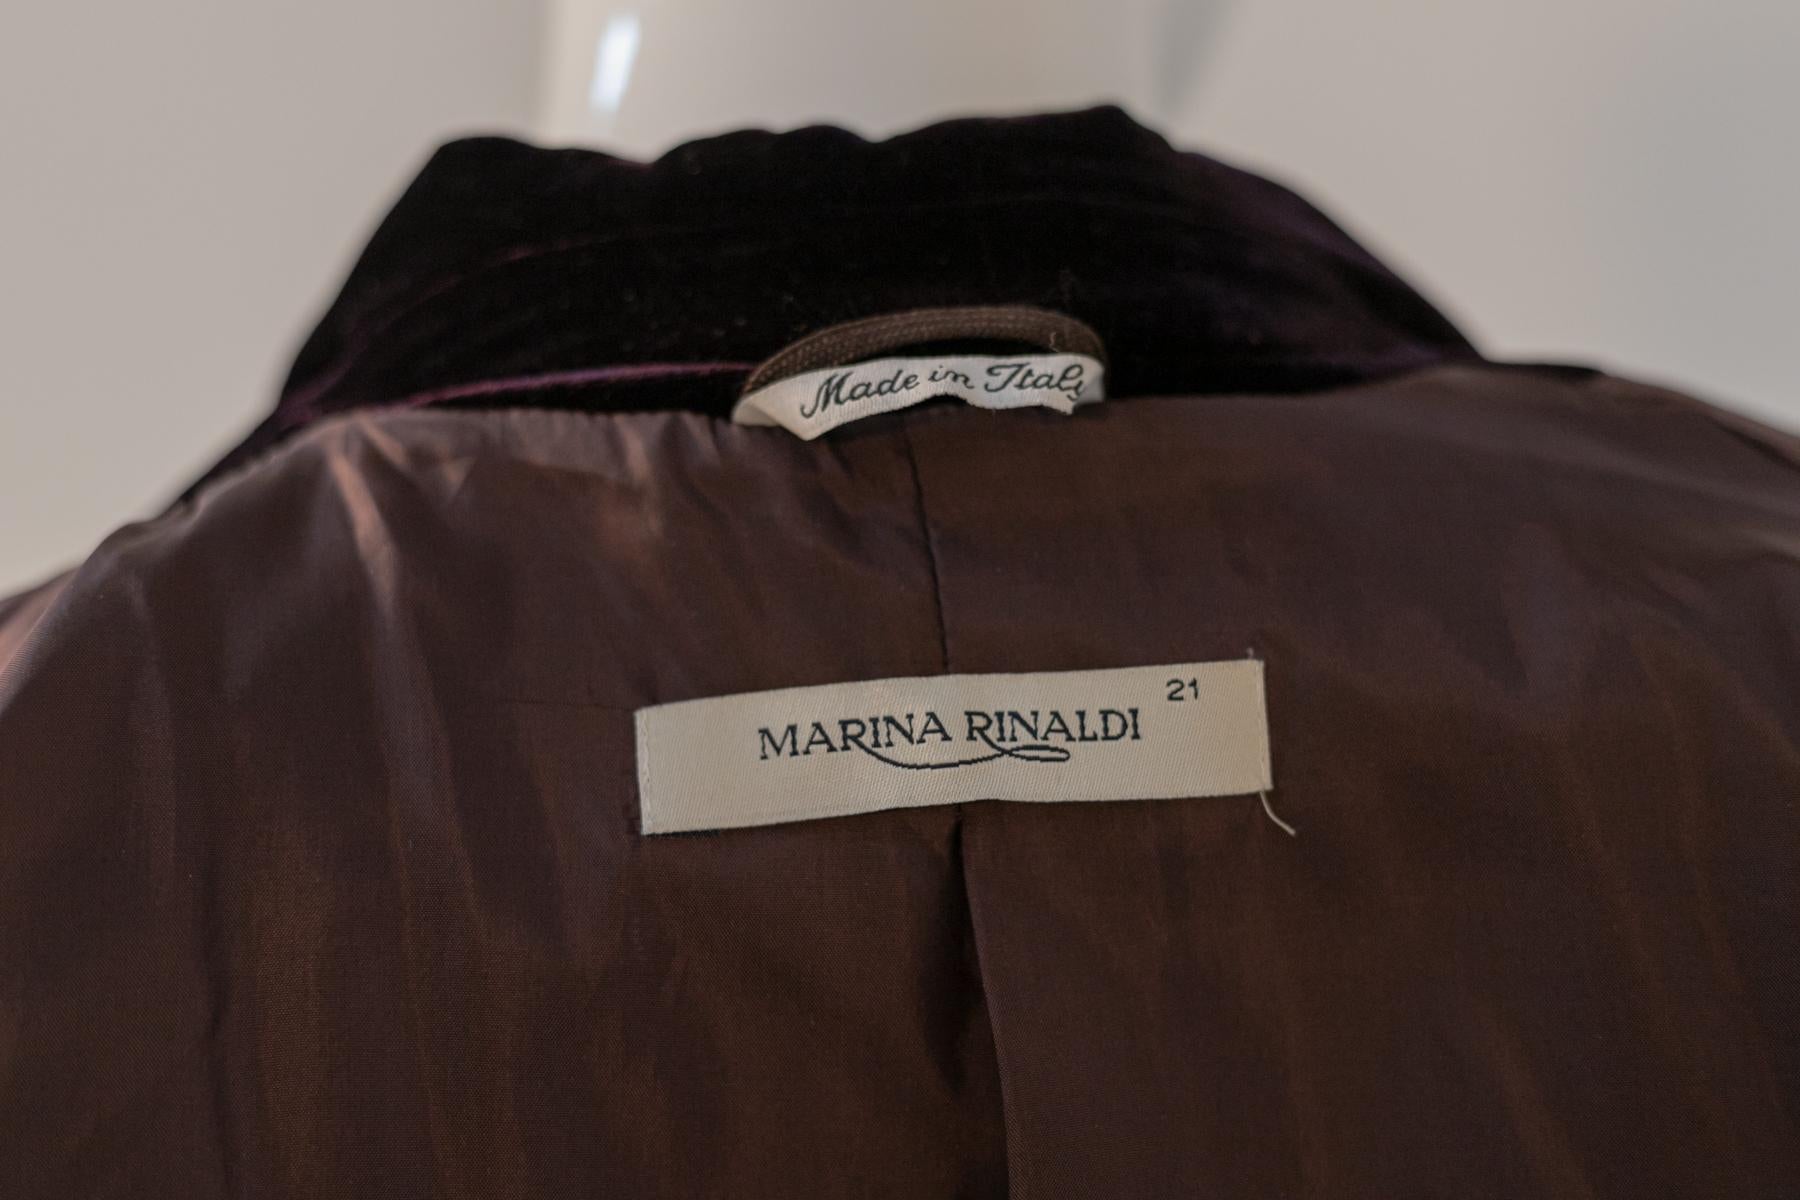 Beautiful elegant jacket designed by Marina Rinaldi in the 1990s, fine Italian manufacture. ORIGINAL LABEL.
The jacket is made of cotton, dark brown in color.
The cut is very soft thanks to the lightweight fabric. The sleeves are quite wide to give